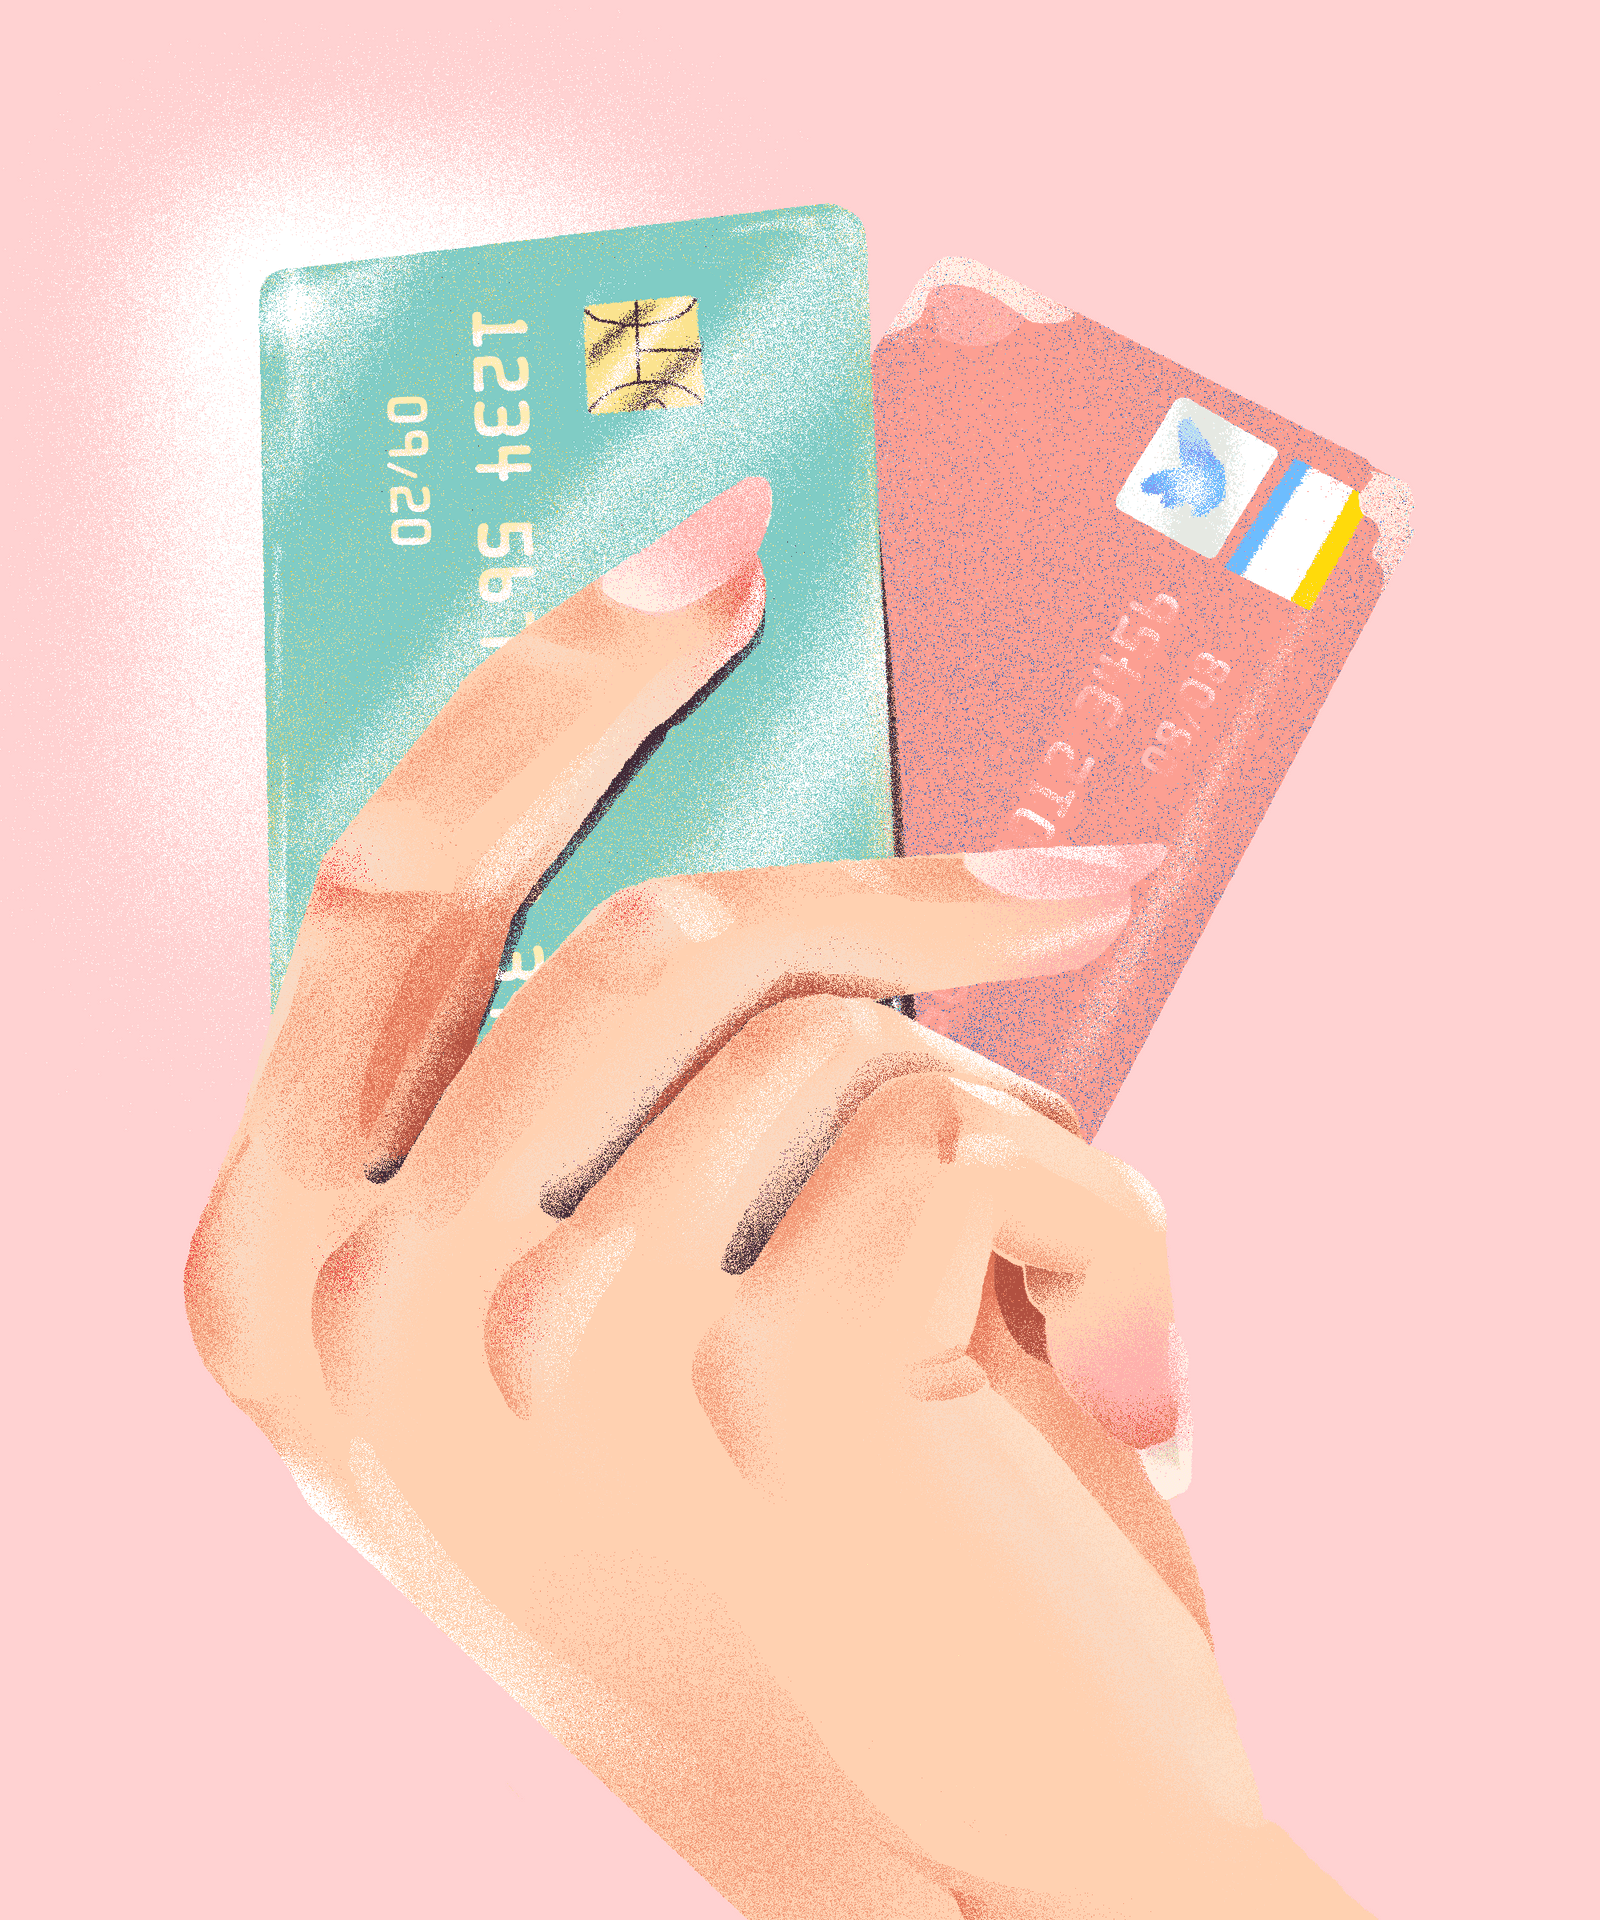 A Hand Holding A Credit Card And A Debit Card